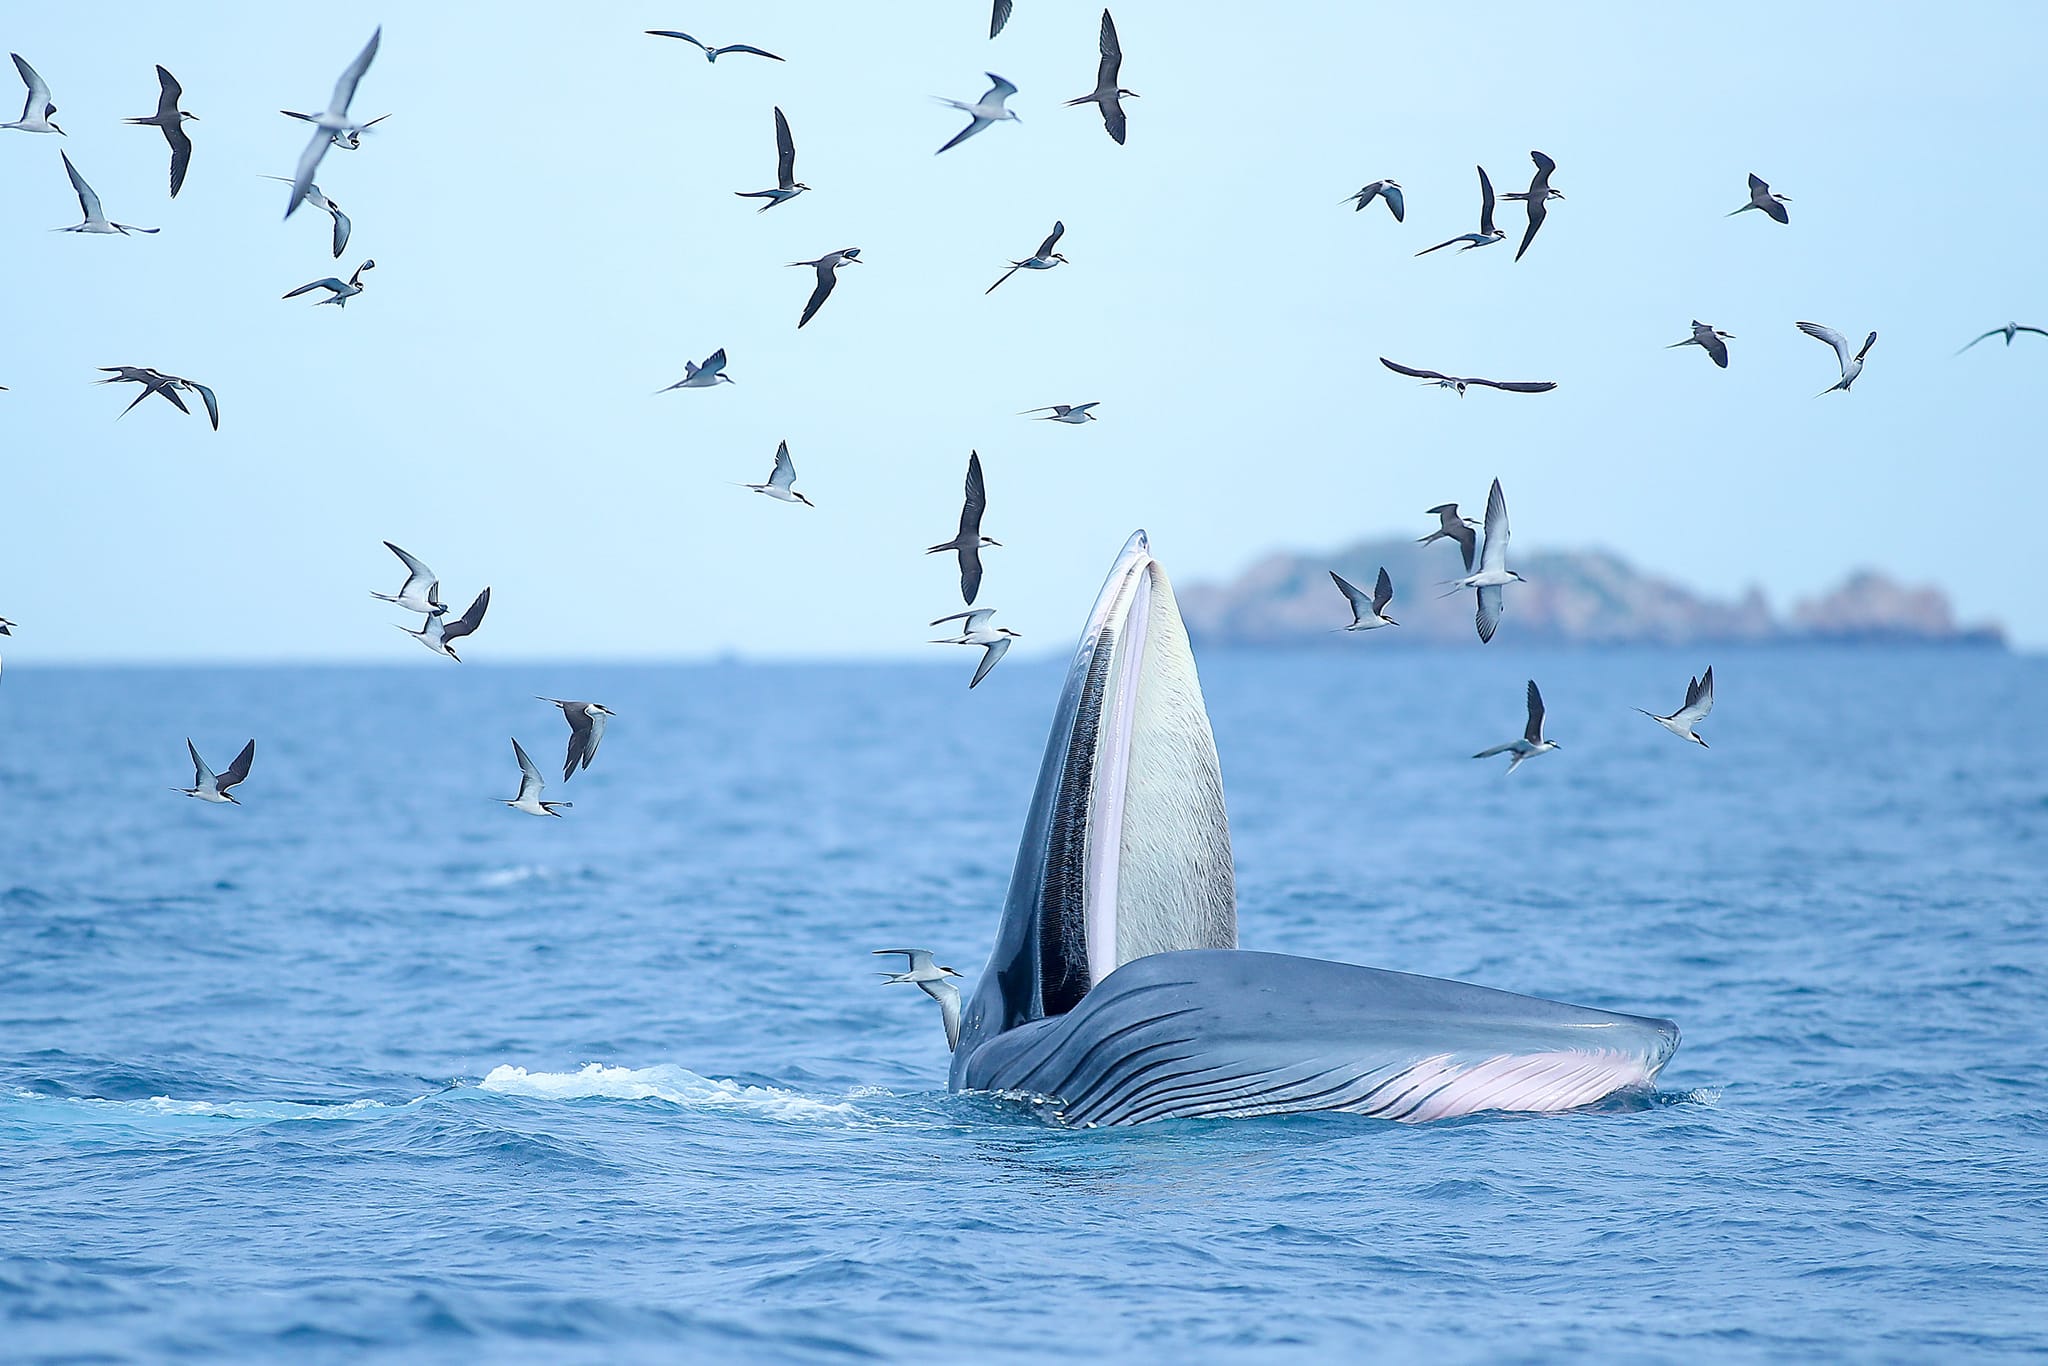 A blue whale lunges toward fish in the waters near De Gi beach in Phu Cat District, Binh Dinh Province, Vietnam. Photo: Nguyen Dung / Tuoi Tre